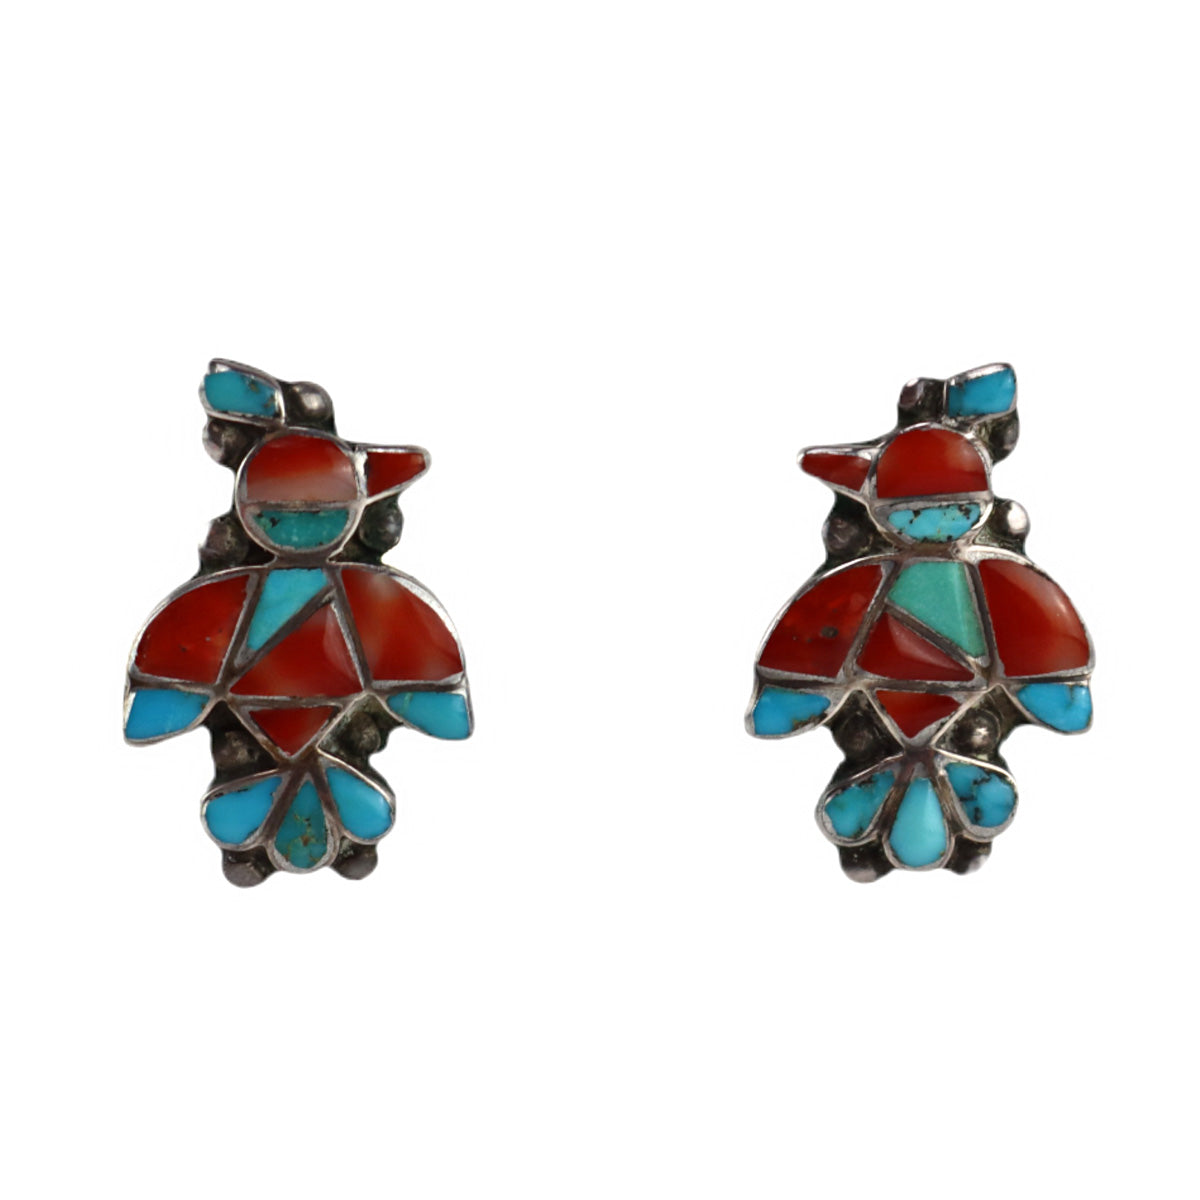 Zuni - Turquoise, Spiny Oyster, and Silver Channel Inlay Thunderbird Clip-On Earrings c. 1950s, 1.125" x 0.75" (J16019)